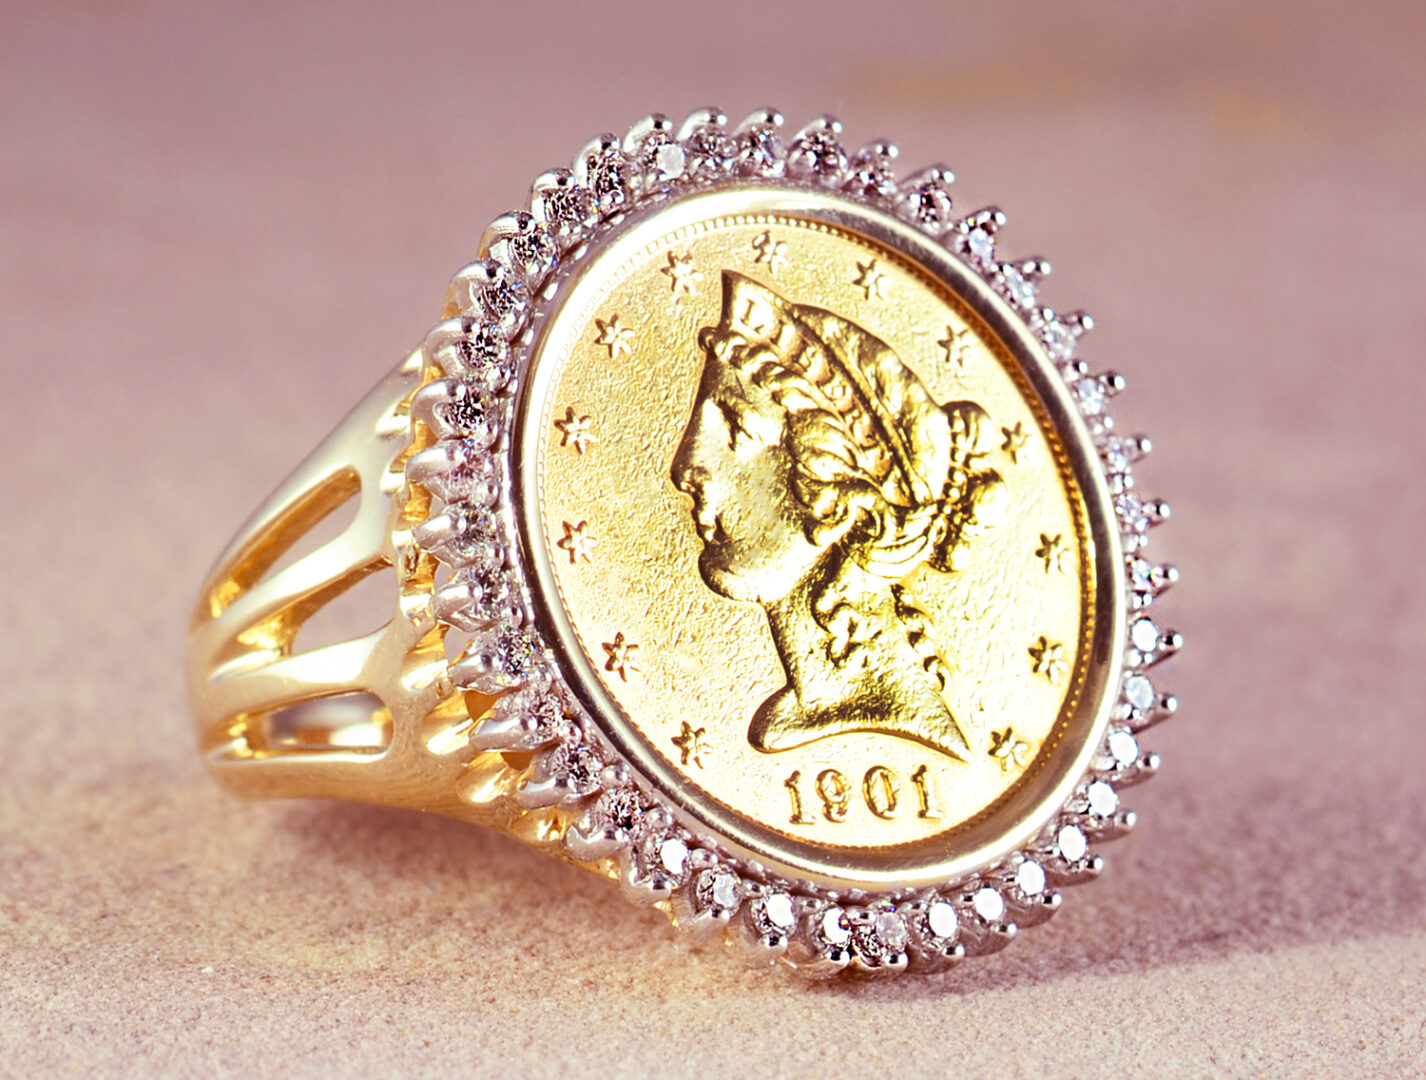 LADIES COIN RINGS1 CR961 -80 CTS